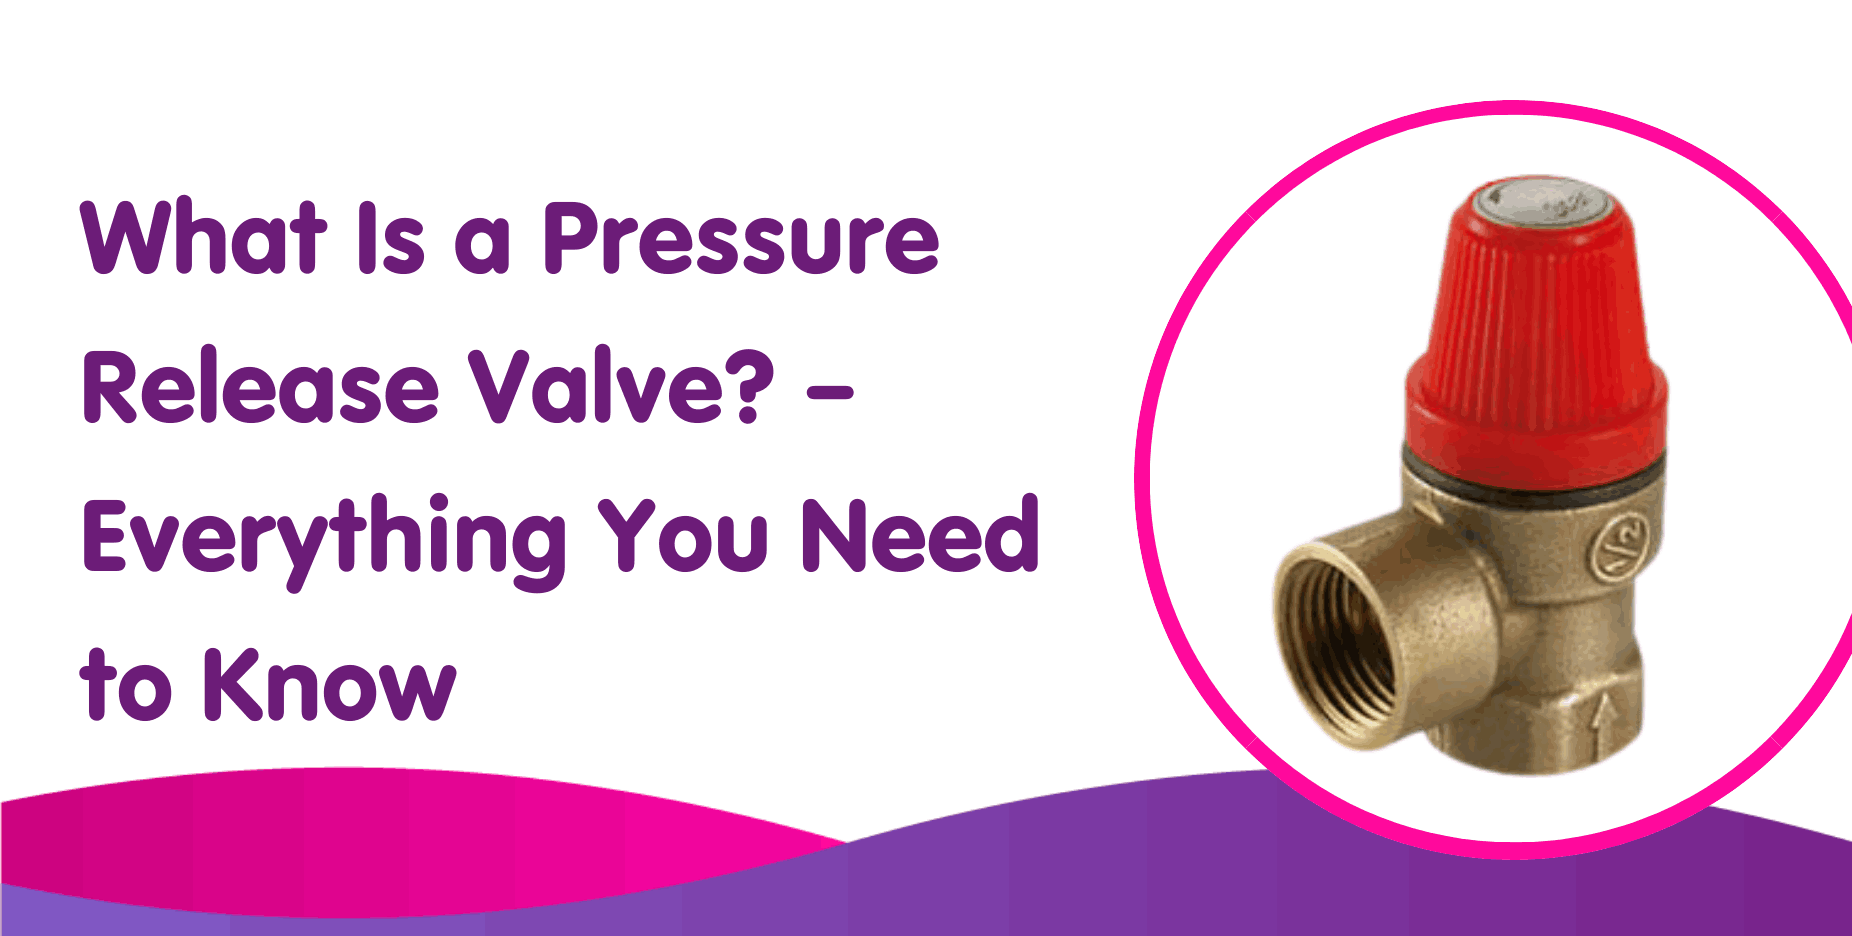 What Is a Pressure Release Valve? – Everything You Need to Know